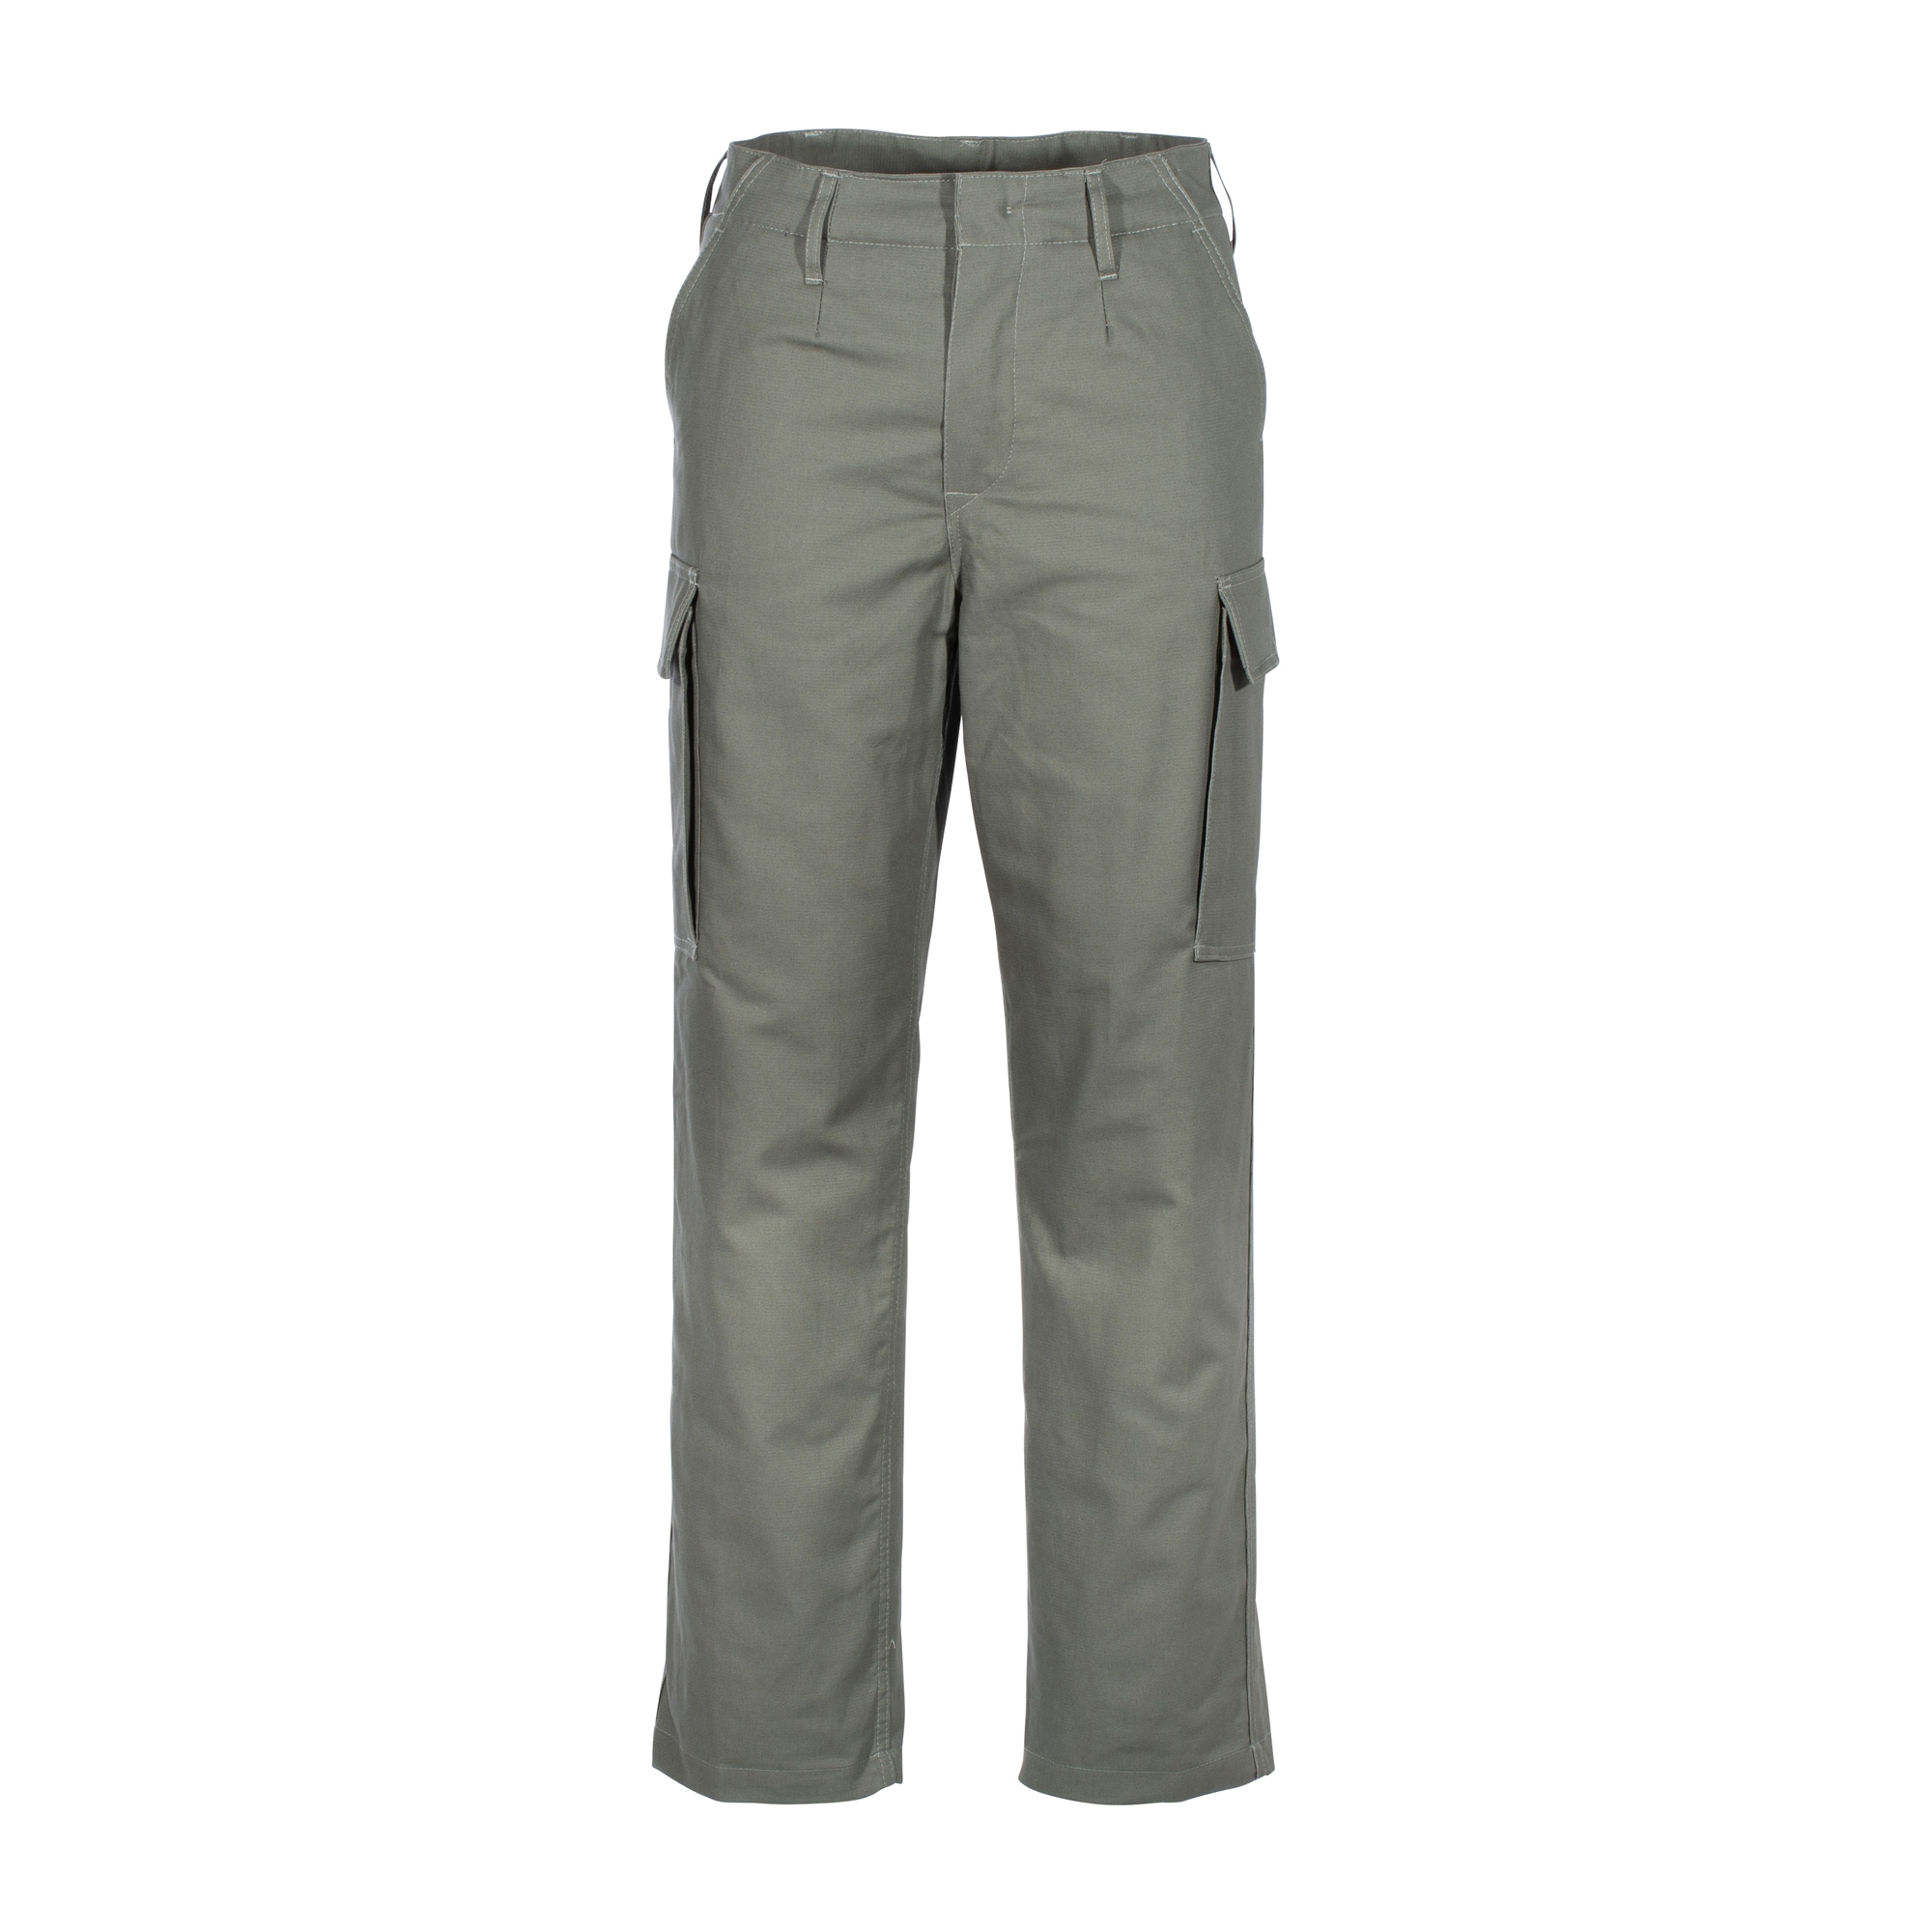 Purchase the BW Moleskin Pants with Thermal Liner olive by ASMC